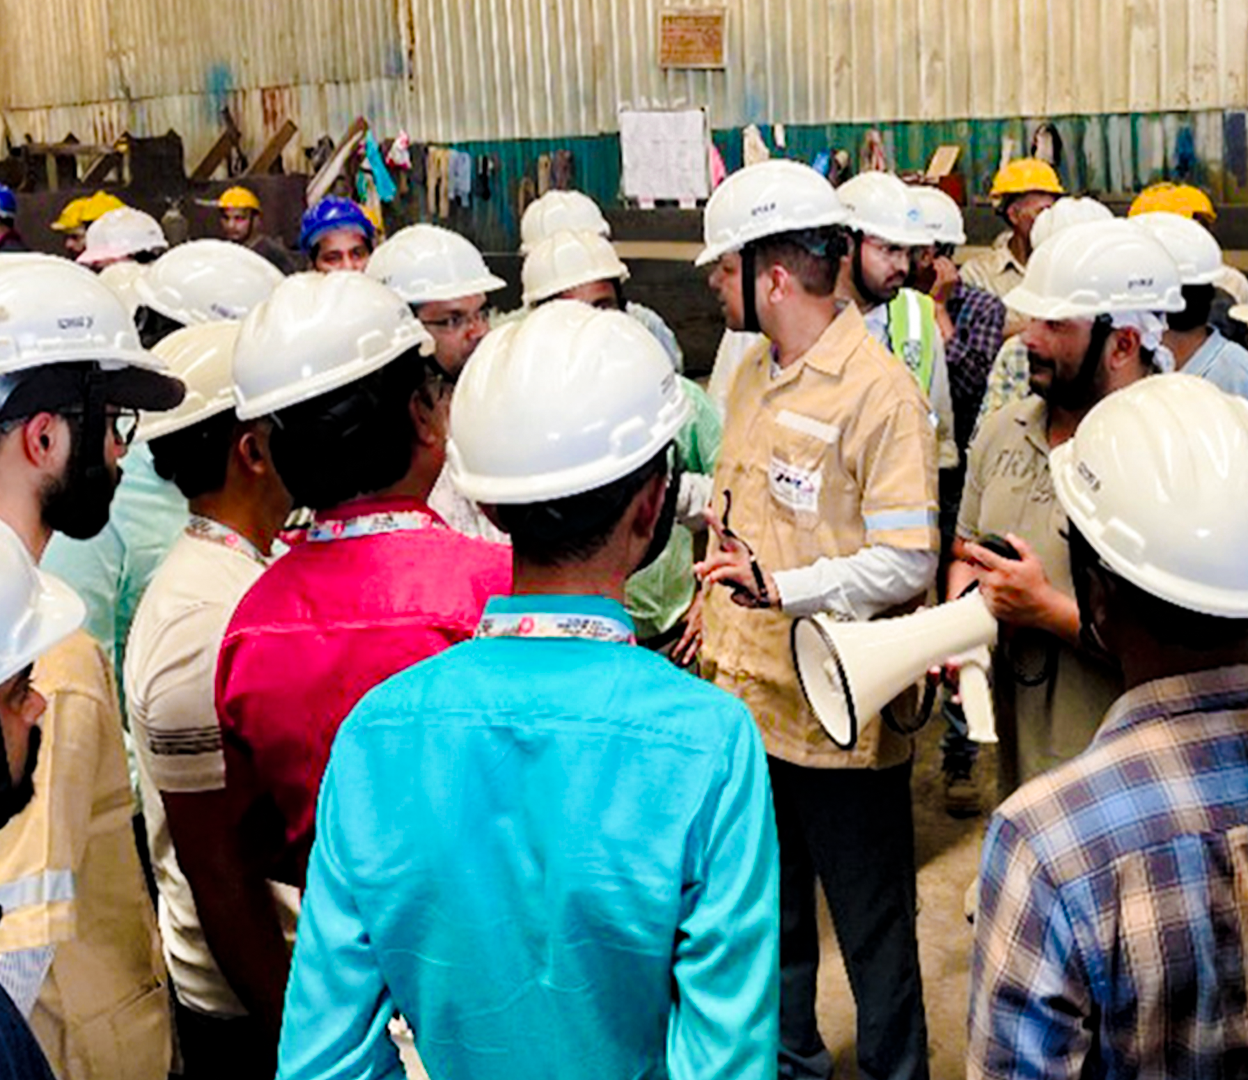 NHSRCL organised a knowledge sharing workshops for Indian Railway artisan staff in collaboration with Western Railways and Central Railways at a steel fabrication workshop in Vapi, Gujarat